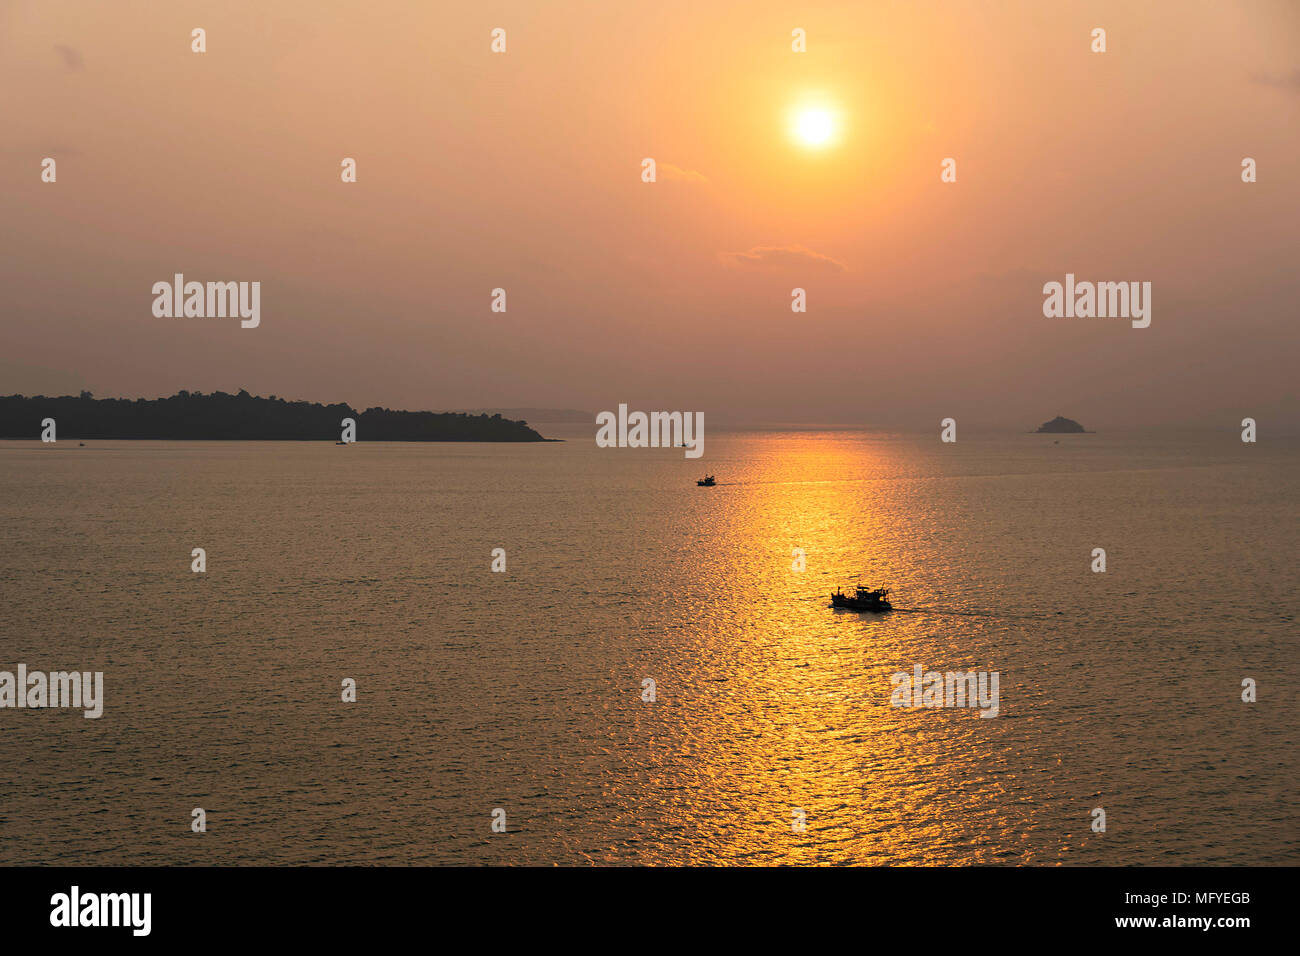 the sun falls in the sea near Singapore and the fishing boats continue their work Stock Photo